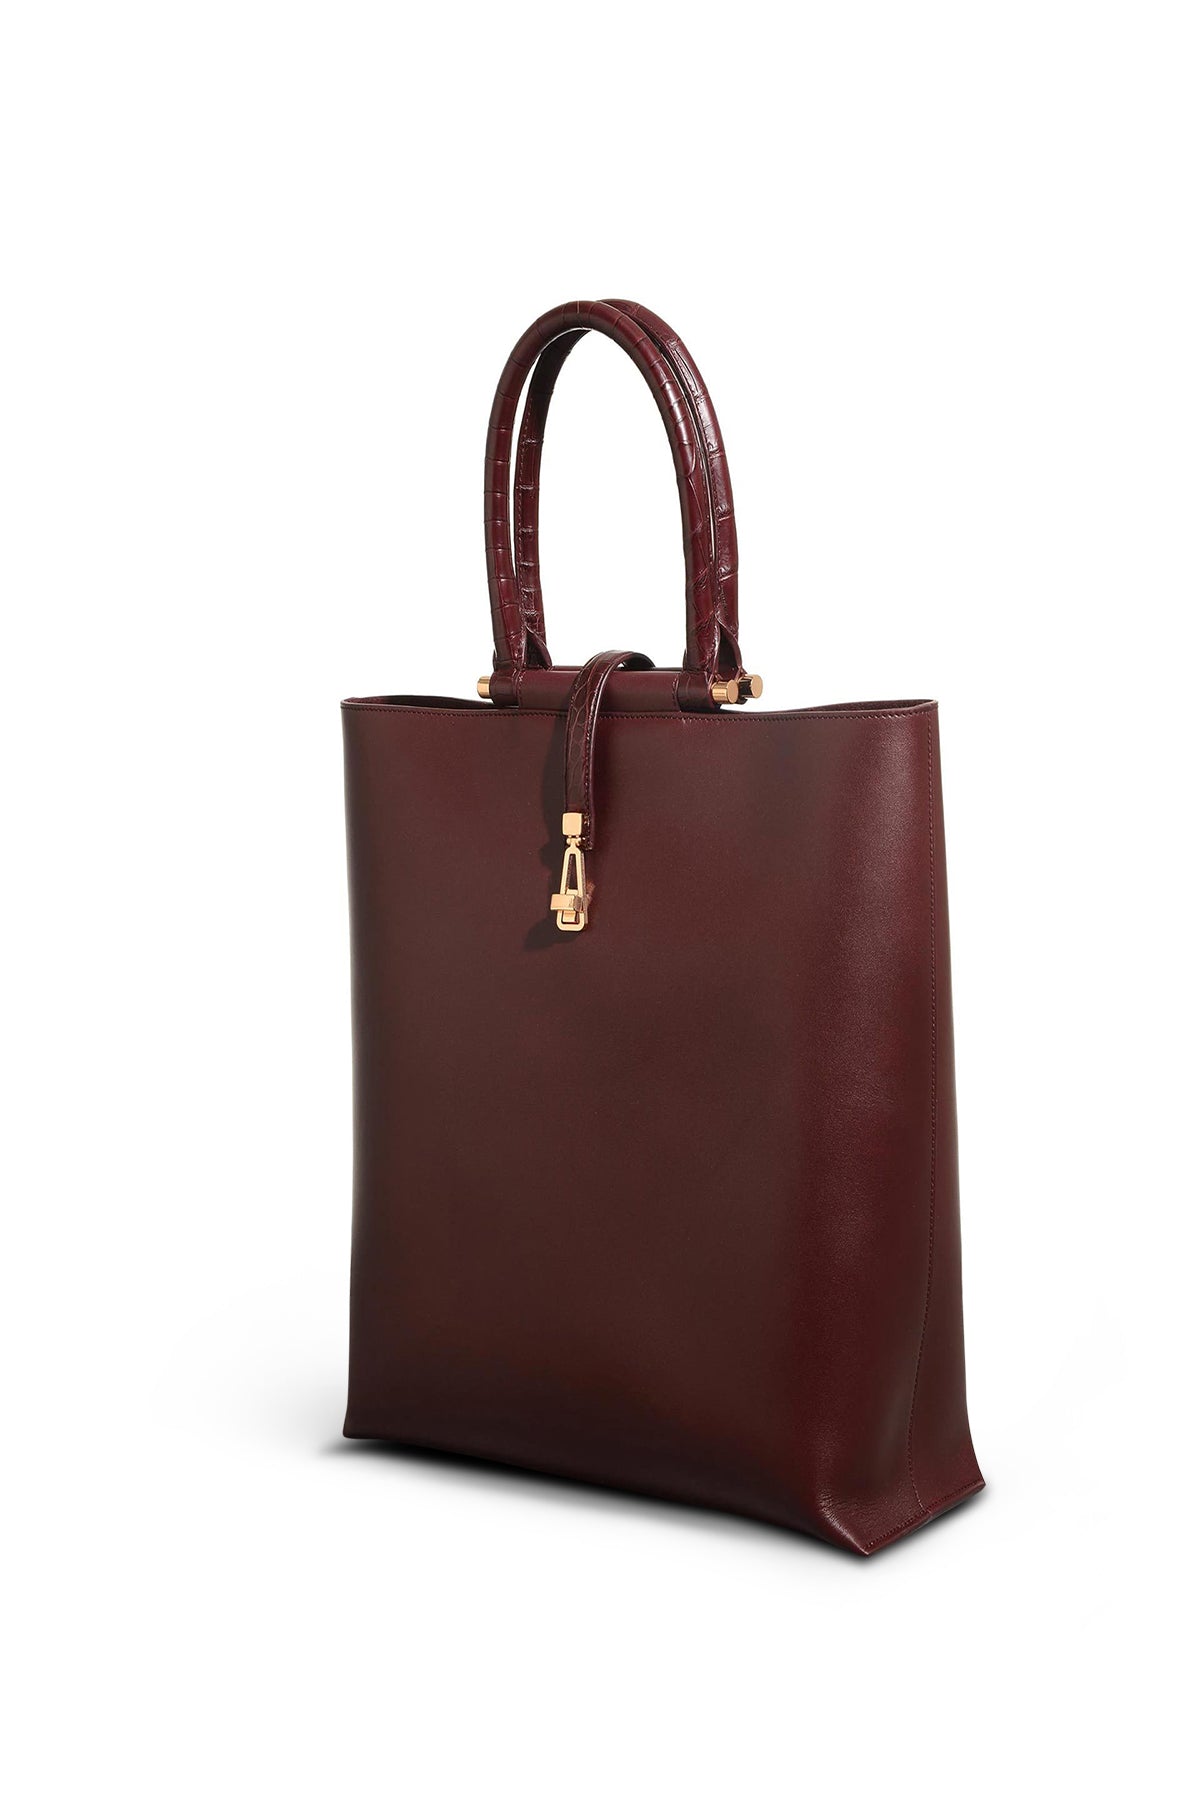 Vevers Tote Bag in Bordeaux Leather with Crocodile Leather Handle